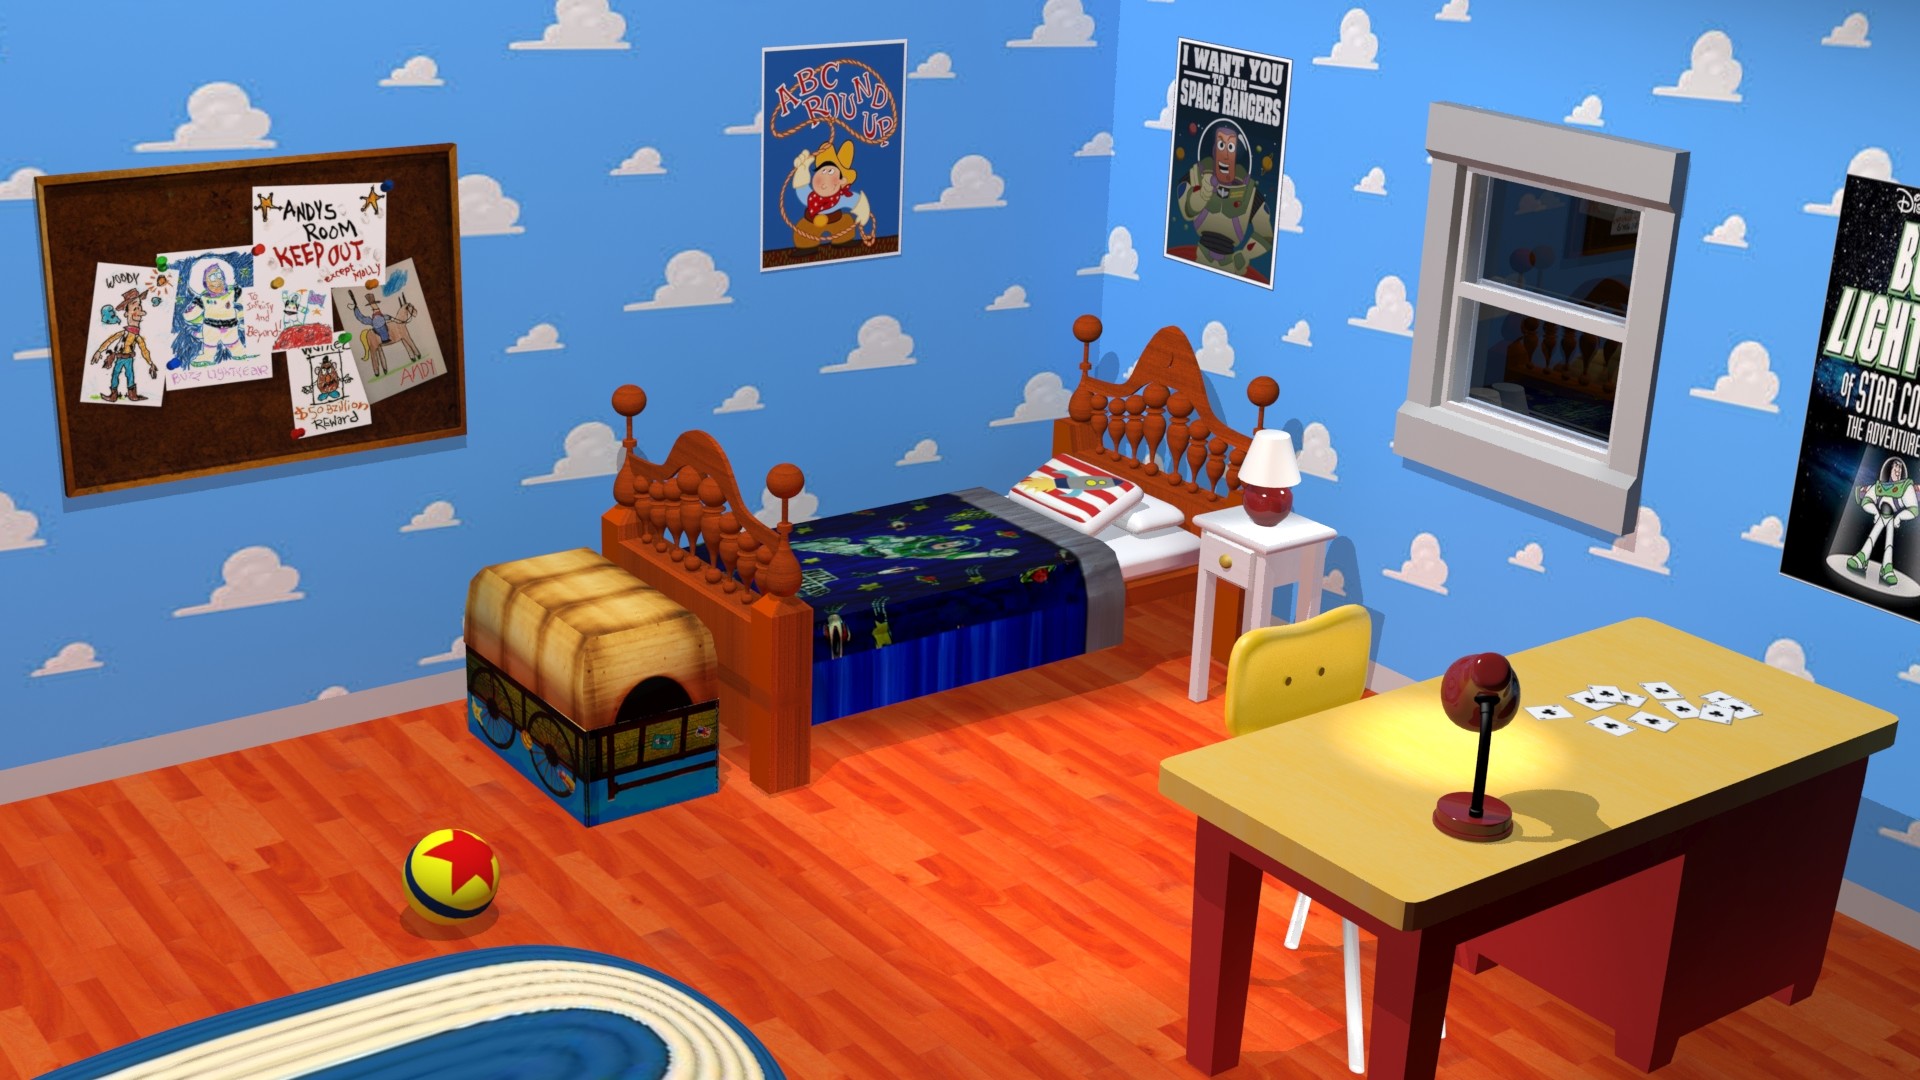 Toy Story Andy's Bedroom